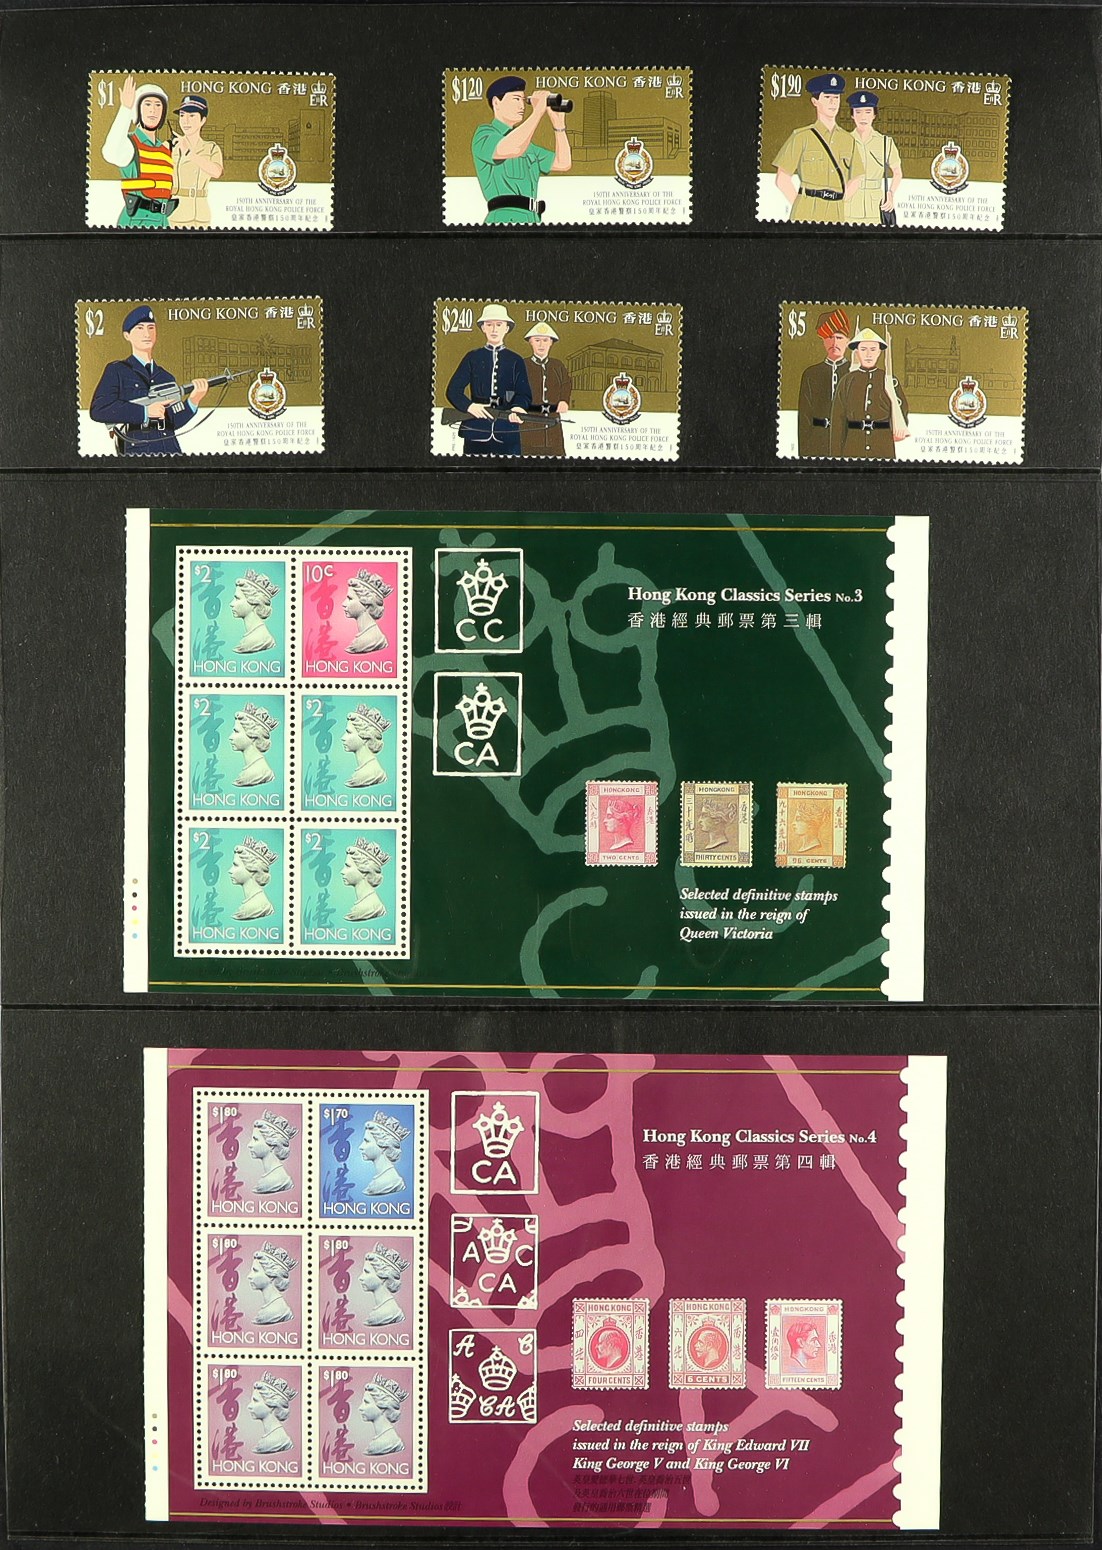 HONG KONG 1970's - 2010's NEVER HINGED MINT large holding of sets, miniature sheets & booklets on - Image 5 of 18